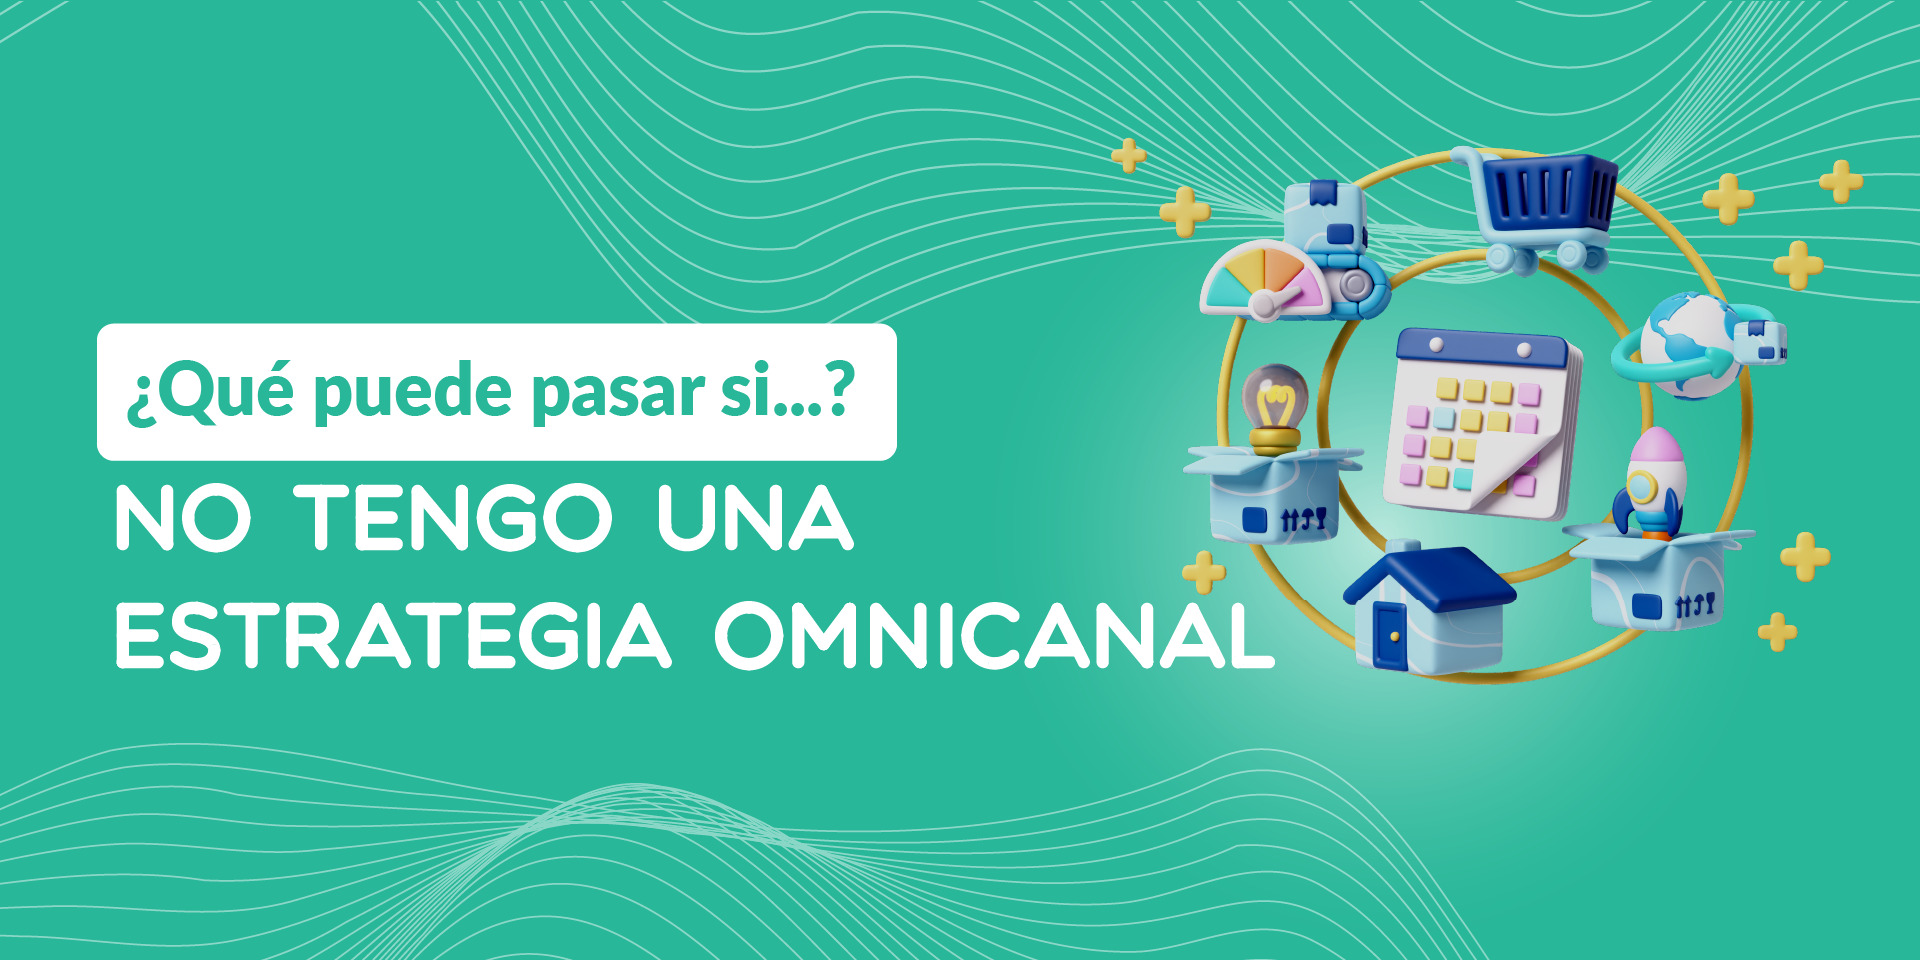 WoowUp omnicanalidad retail